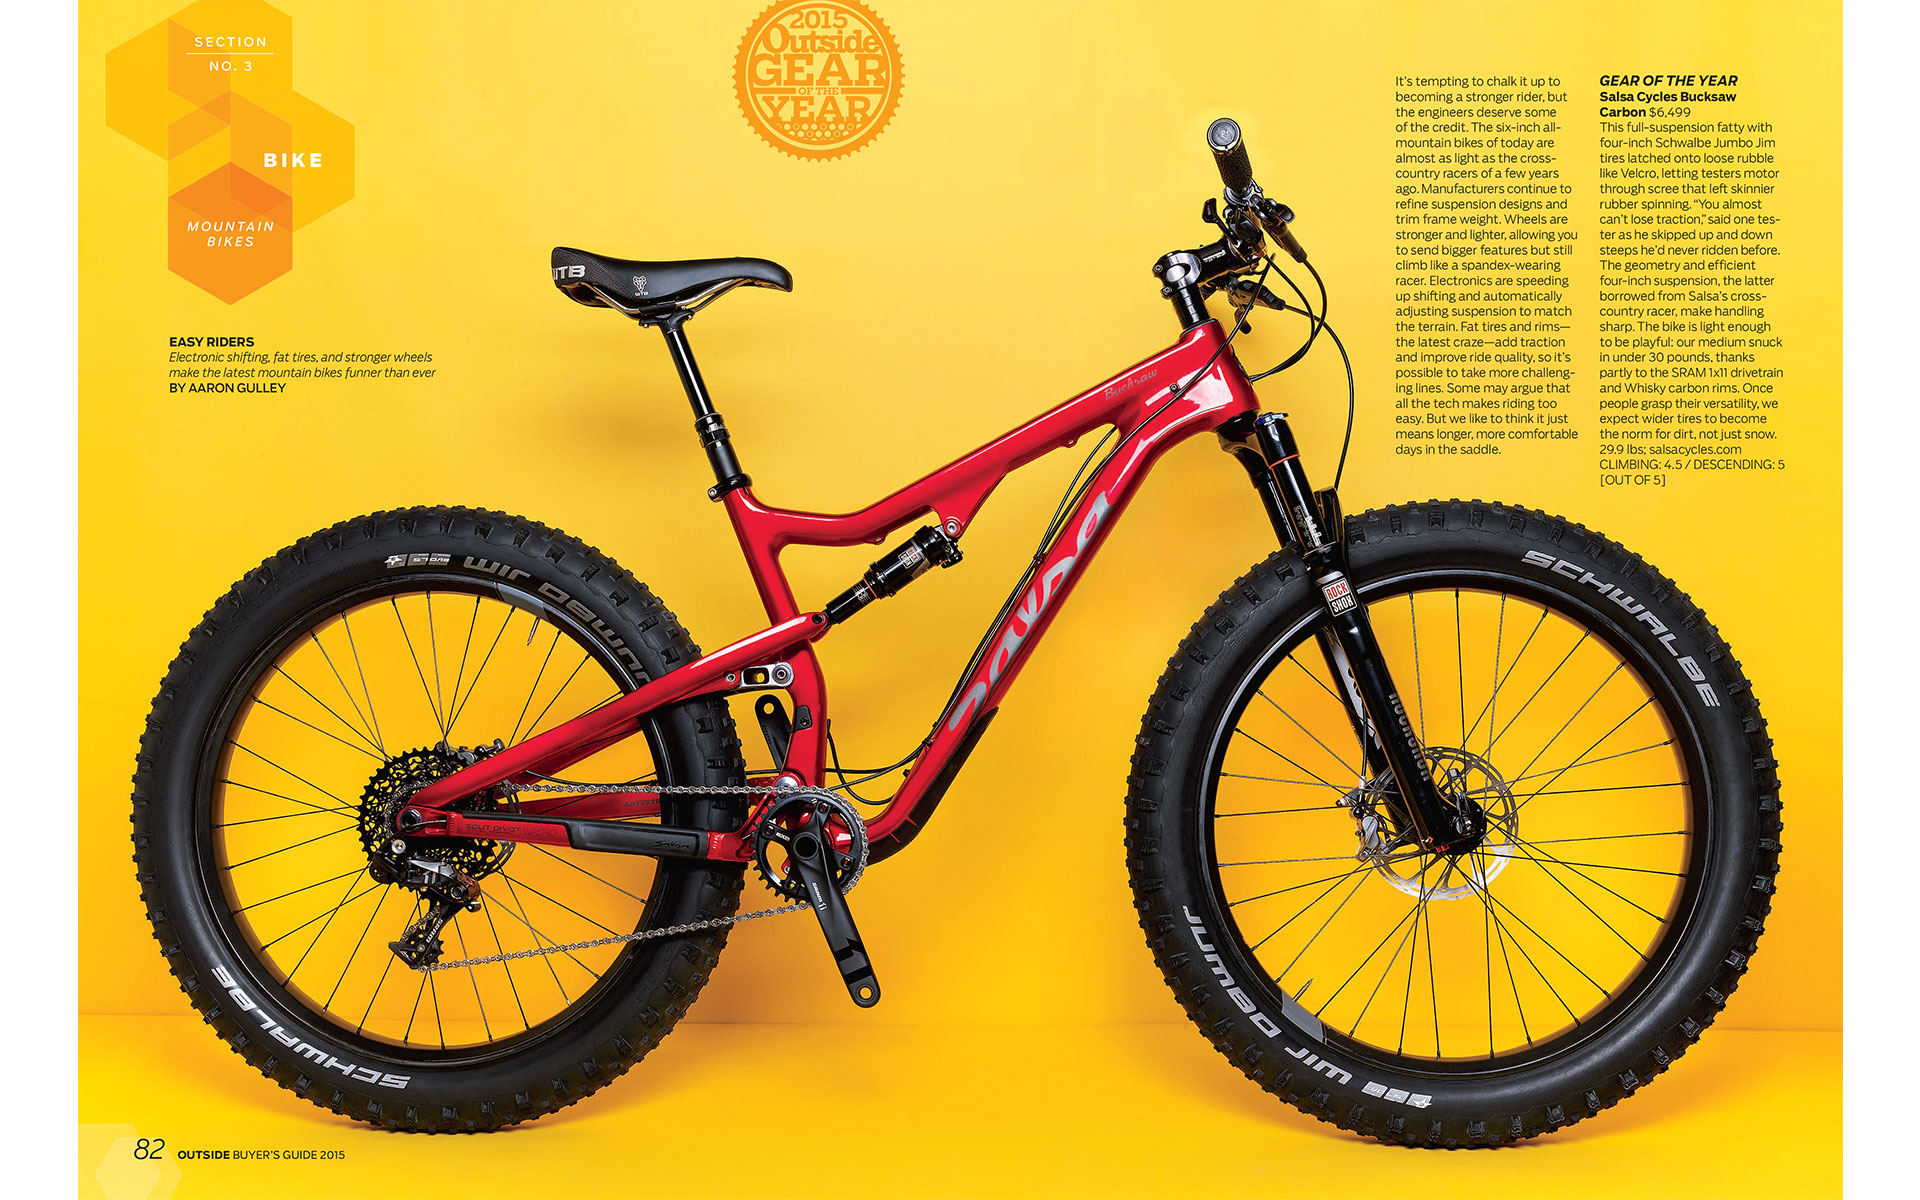 <p style="text-align: center;"><b><font color="2a2871">Outside, Summer Buyers Guide</font></b>
</p>
The best bikes, cycling gear, and apparel of 2015.
<p style="text-align: center;"><a href="/users/AaronGulley18670/OUT_BG_Summer15.pdf" onclick="window.open(this.href, '', 'resizable=no,status=no,location=no,toolbar=no,menubar=no,fullscreen=no,scrollbars=no,dependent=no,width=900'); return false;">Read the Story</a></p>